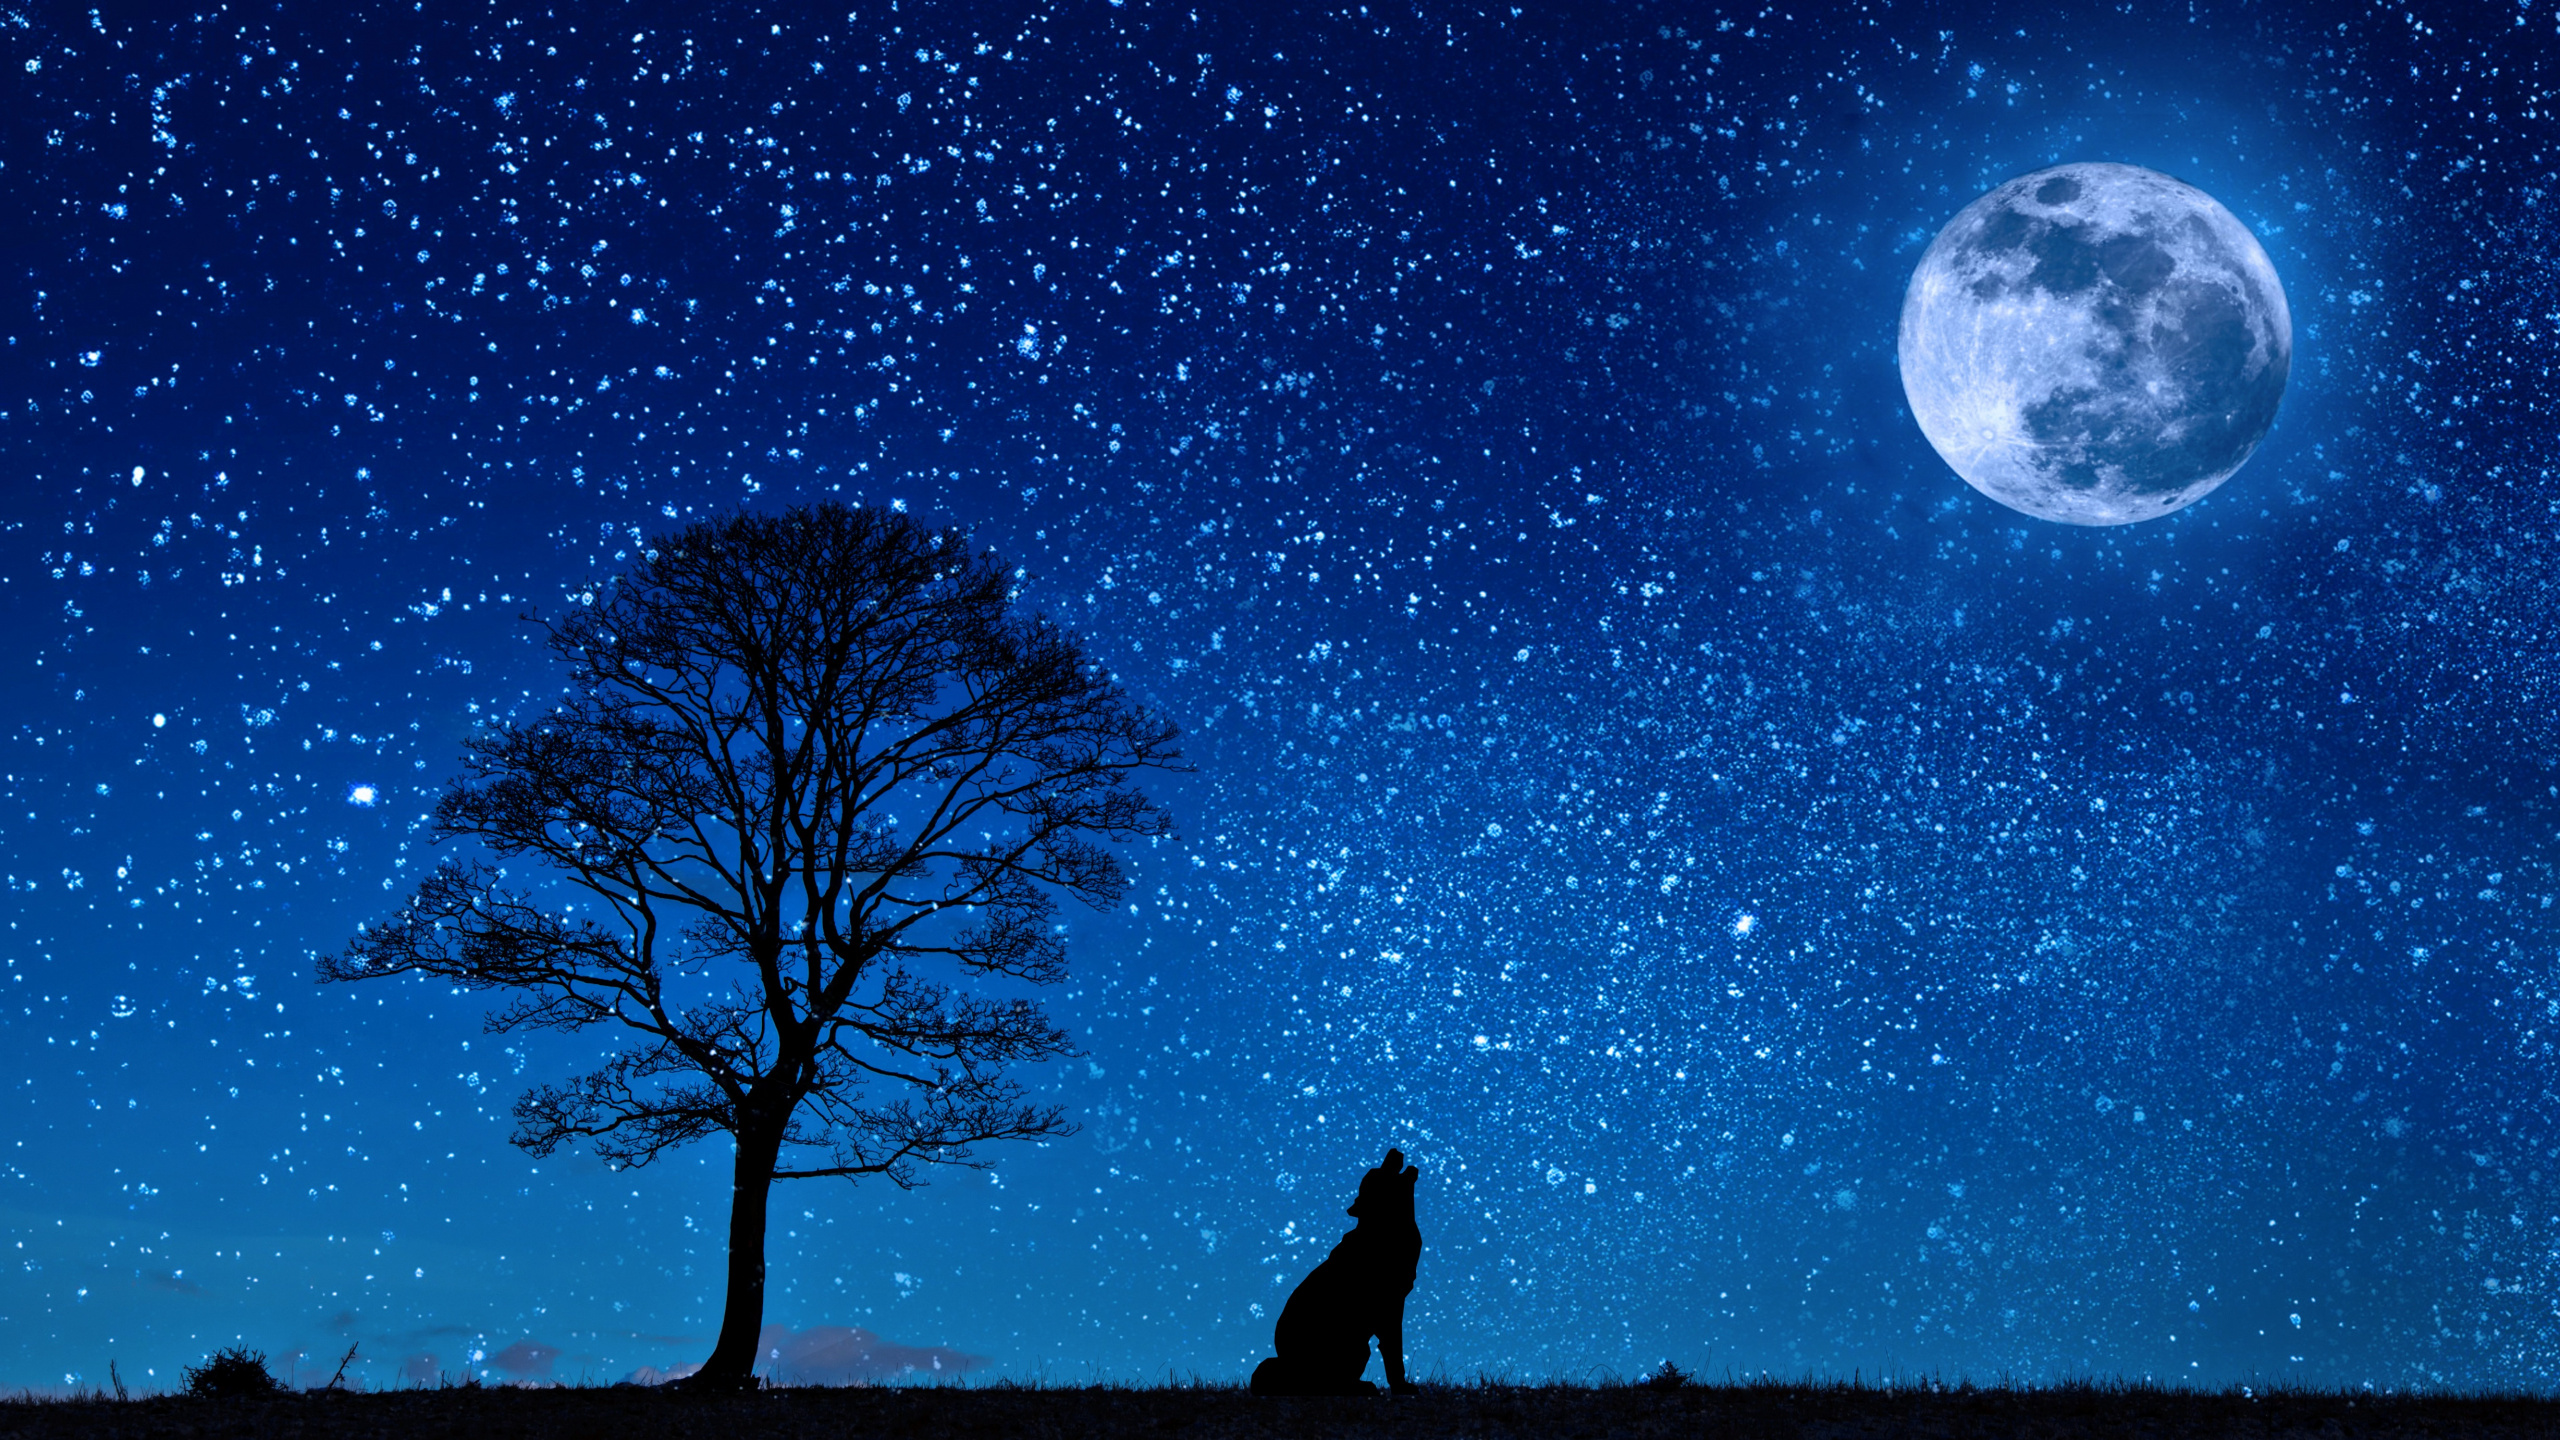 Silhouette of Man Standing Near Bare Tree Under Blue Sky During Night Time. Wallpaper in 2560x1440 Resolution